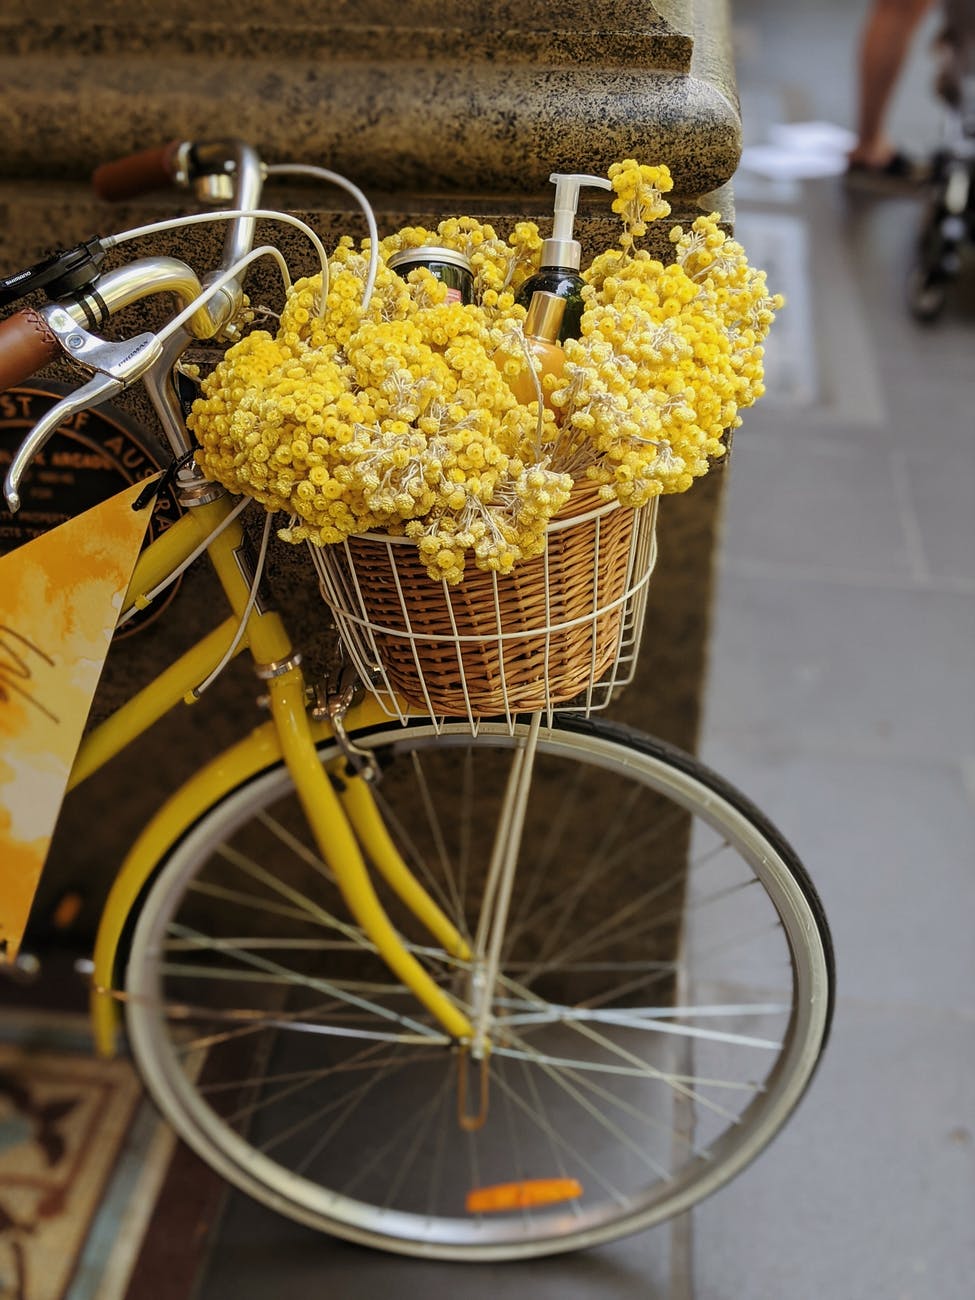 yellow flowers in brown woven basket on bicycle